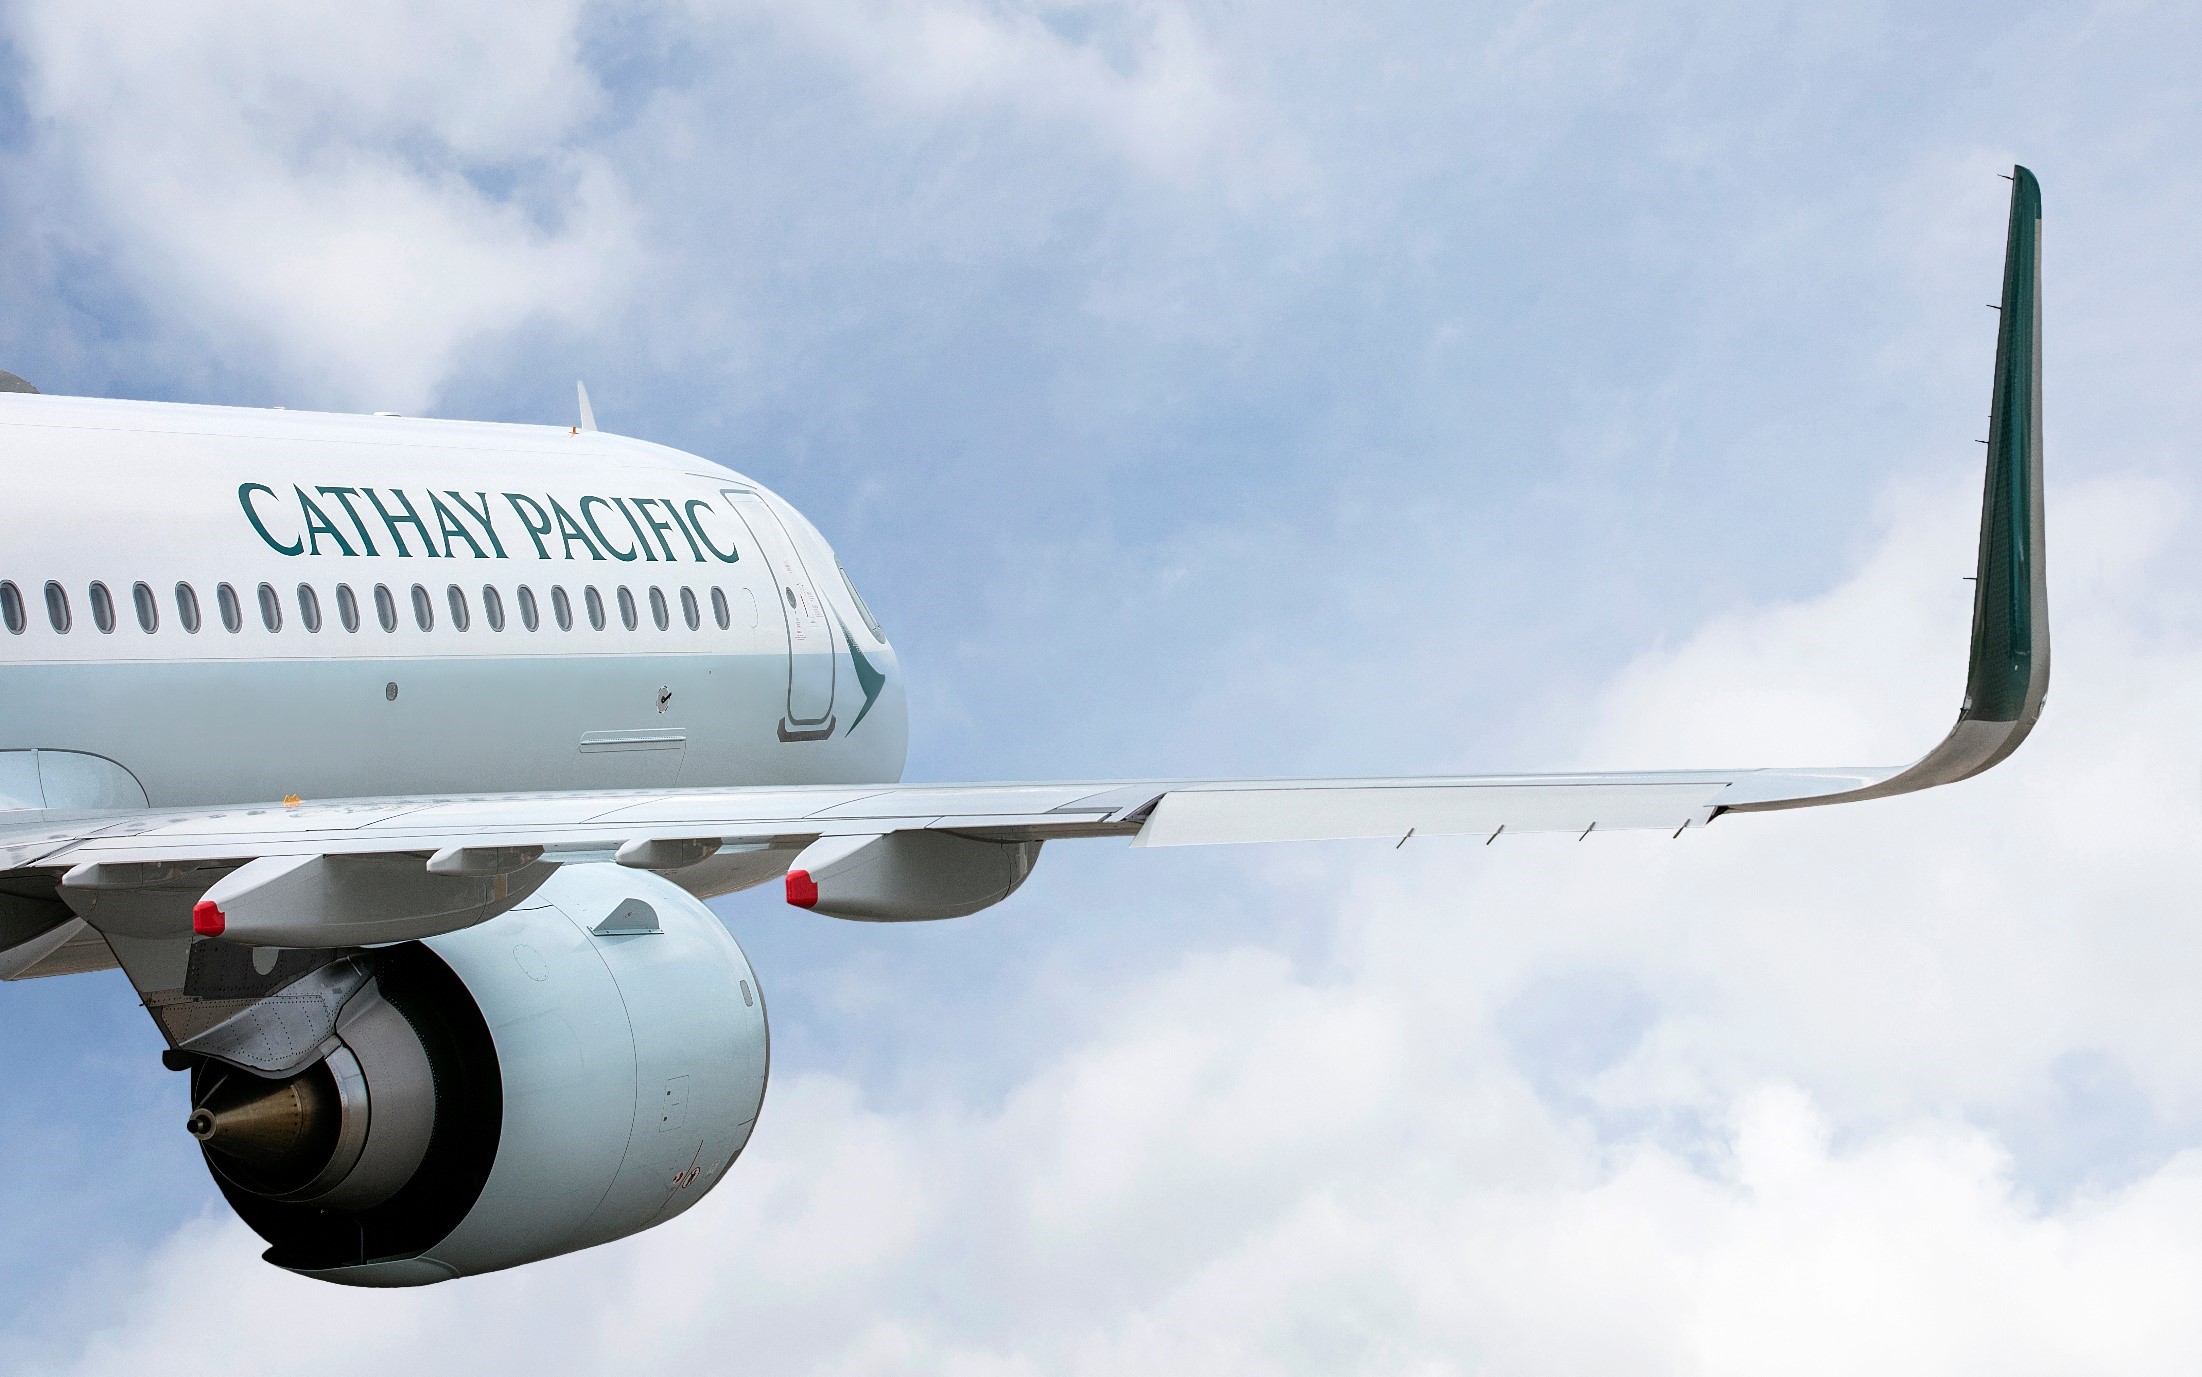 Cathay Pacific took another hit by Hong Kong’s extended airport restrictions